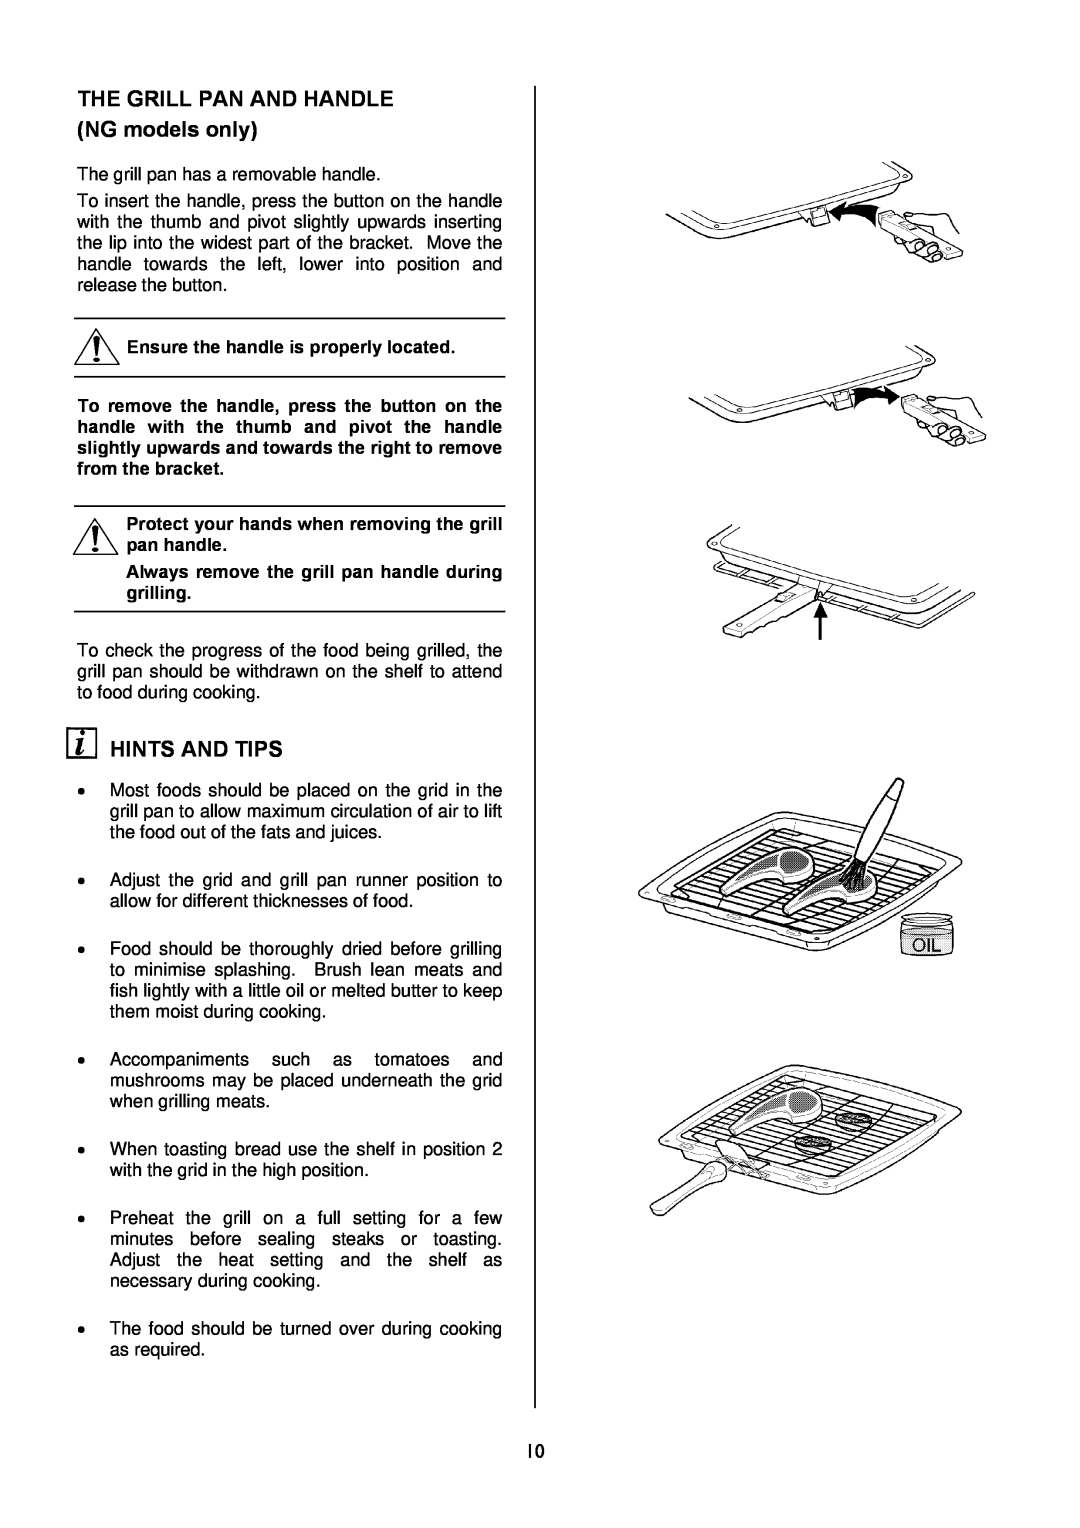 Electrolux EKG5047, EKG5046 THE GRILL PAN AND HANDLE NG models only, Hints And Tips, Ensure the handle is properly located 